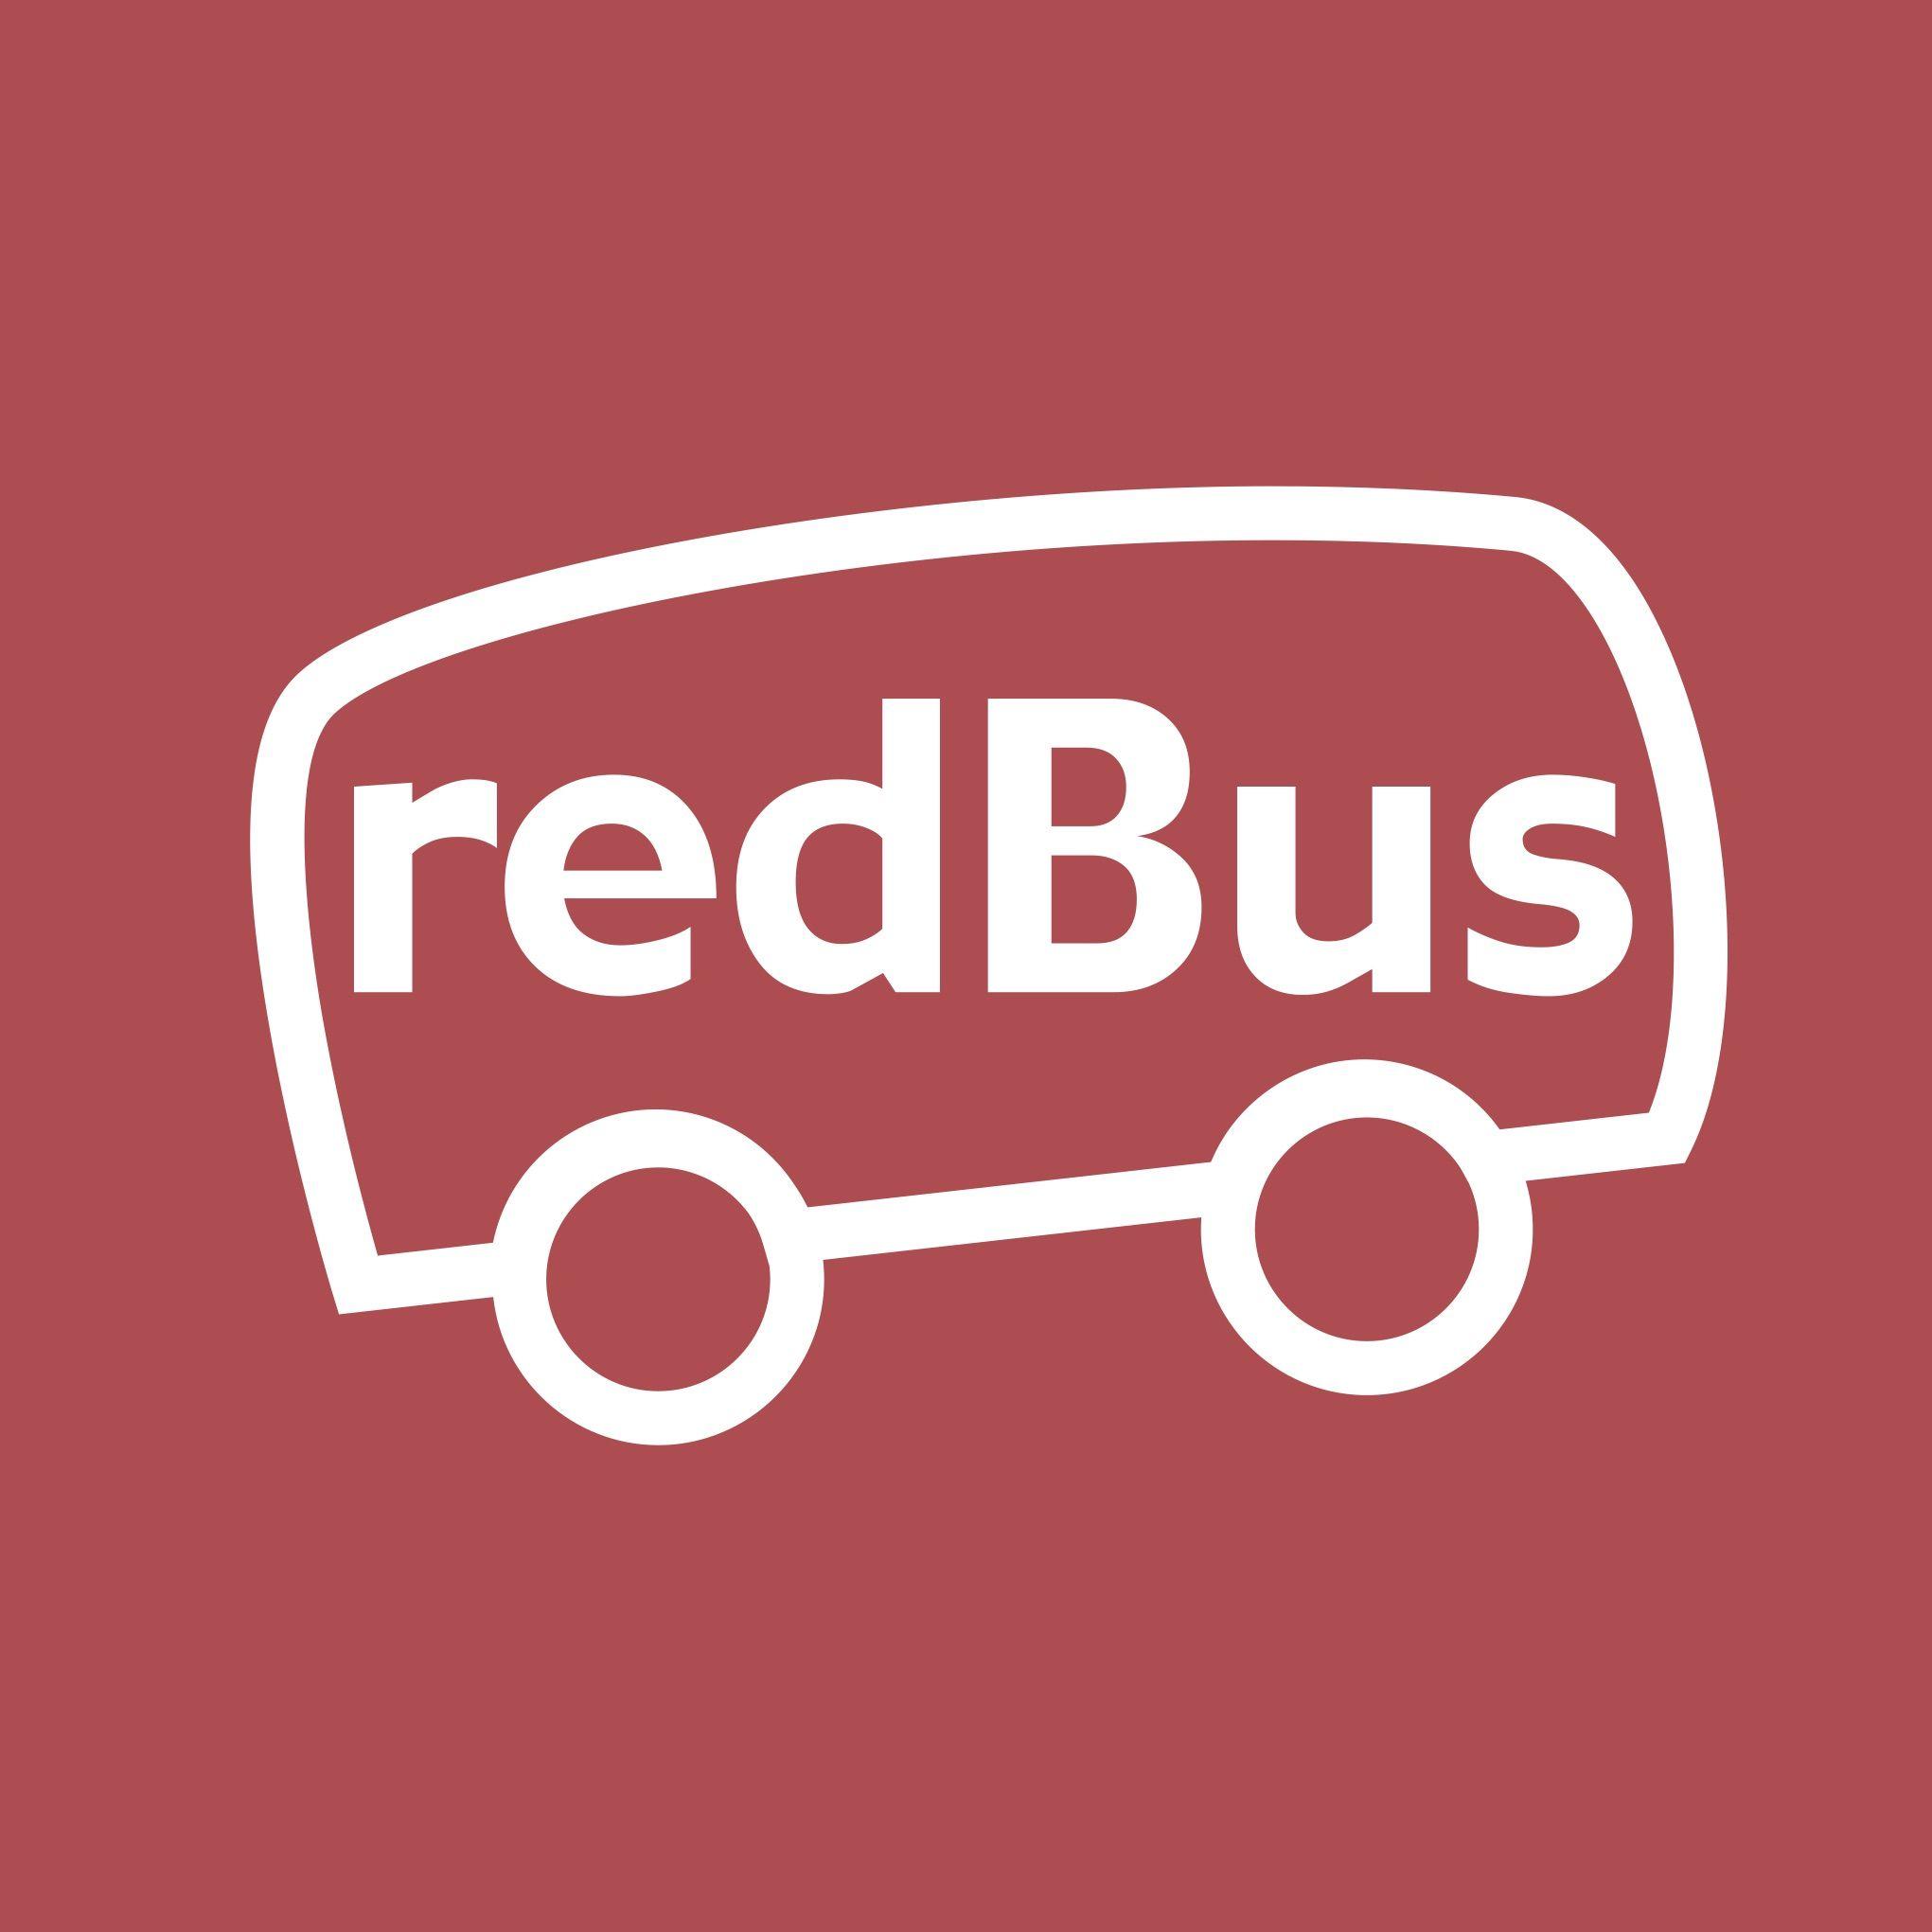 Red Bus Logo - redBus Offers on Visa Cards